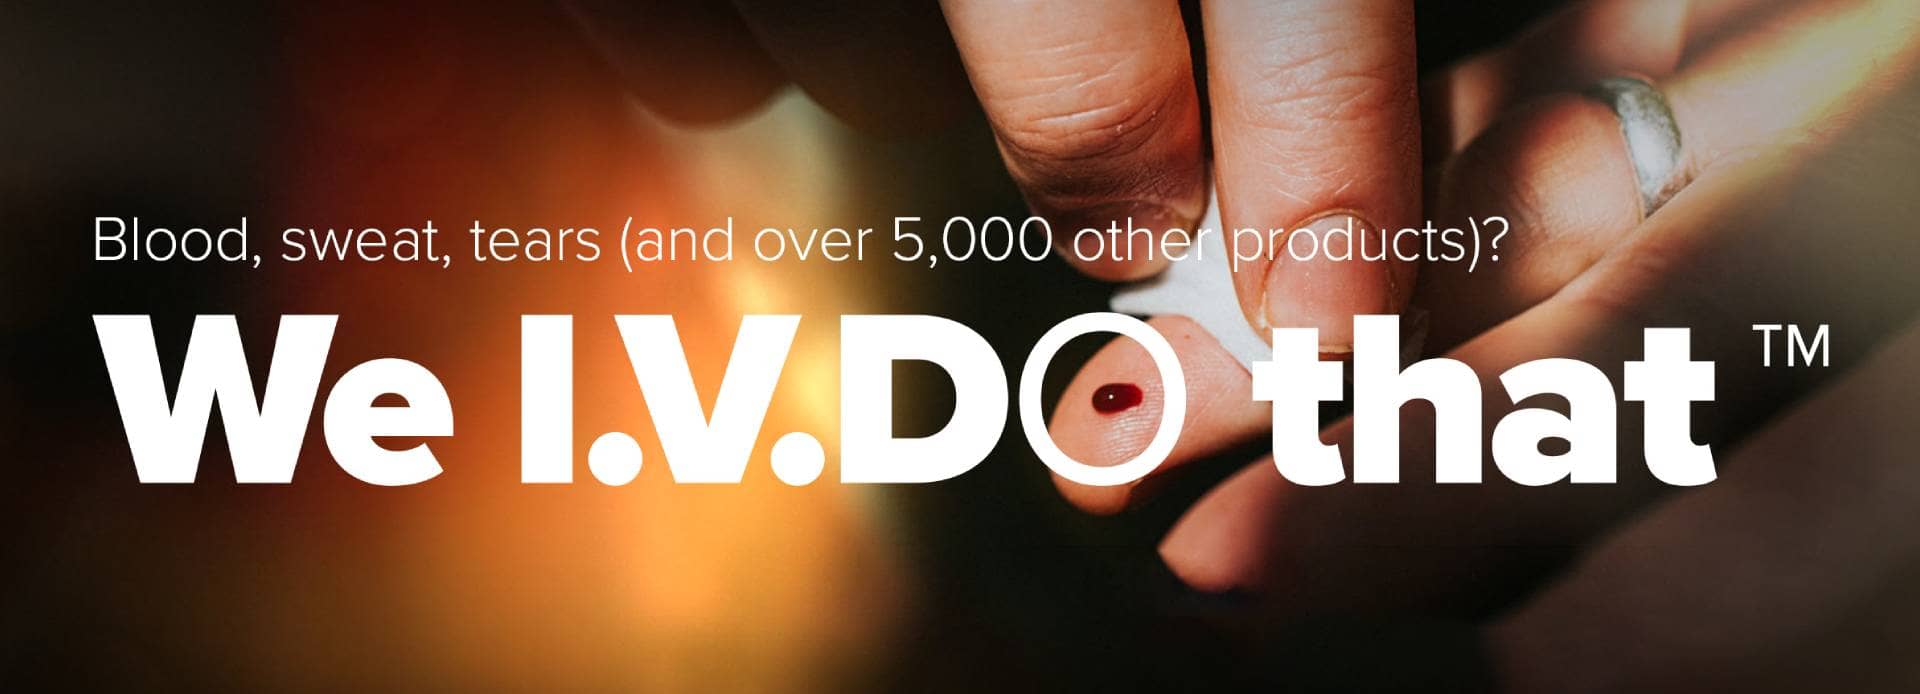 Blood, sweat, tears (and 9,000 other products)? We IVDo that.